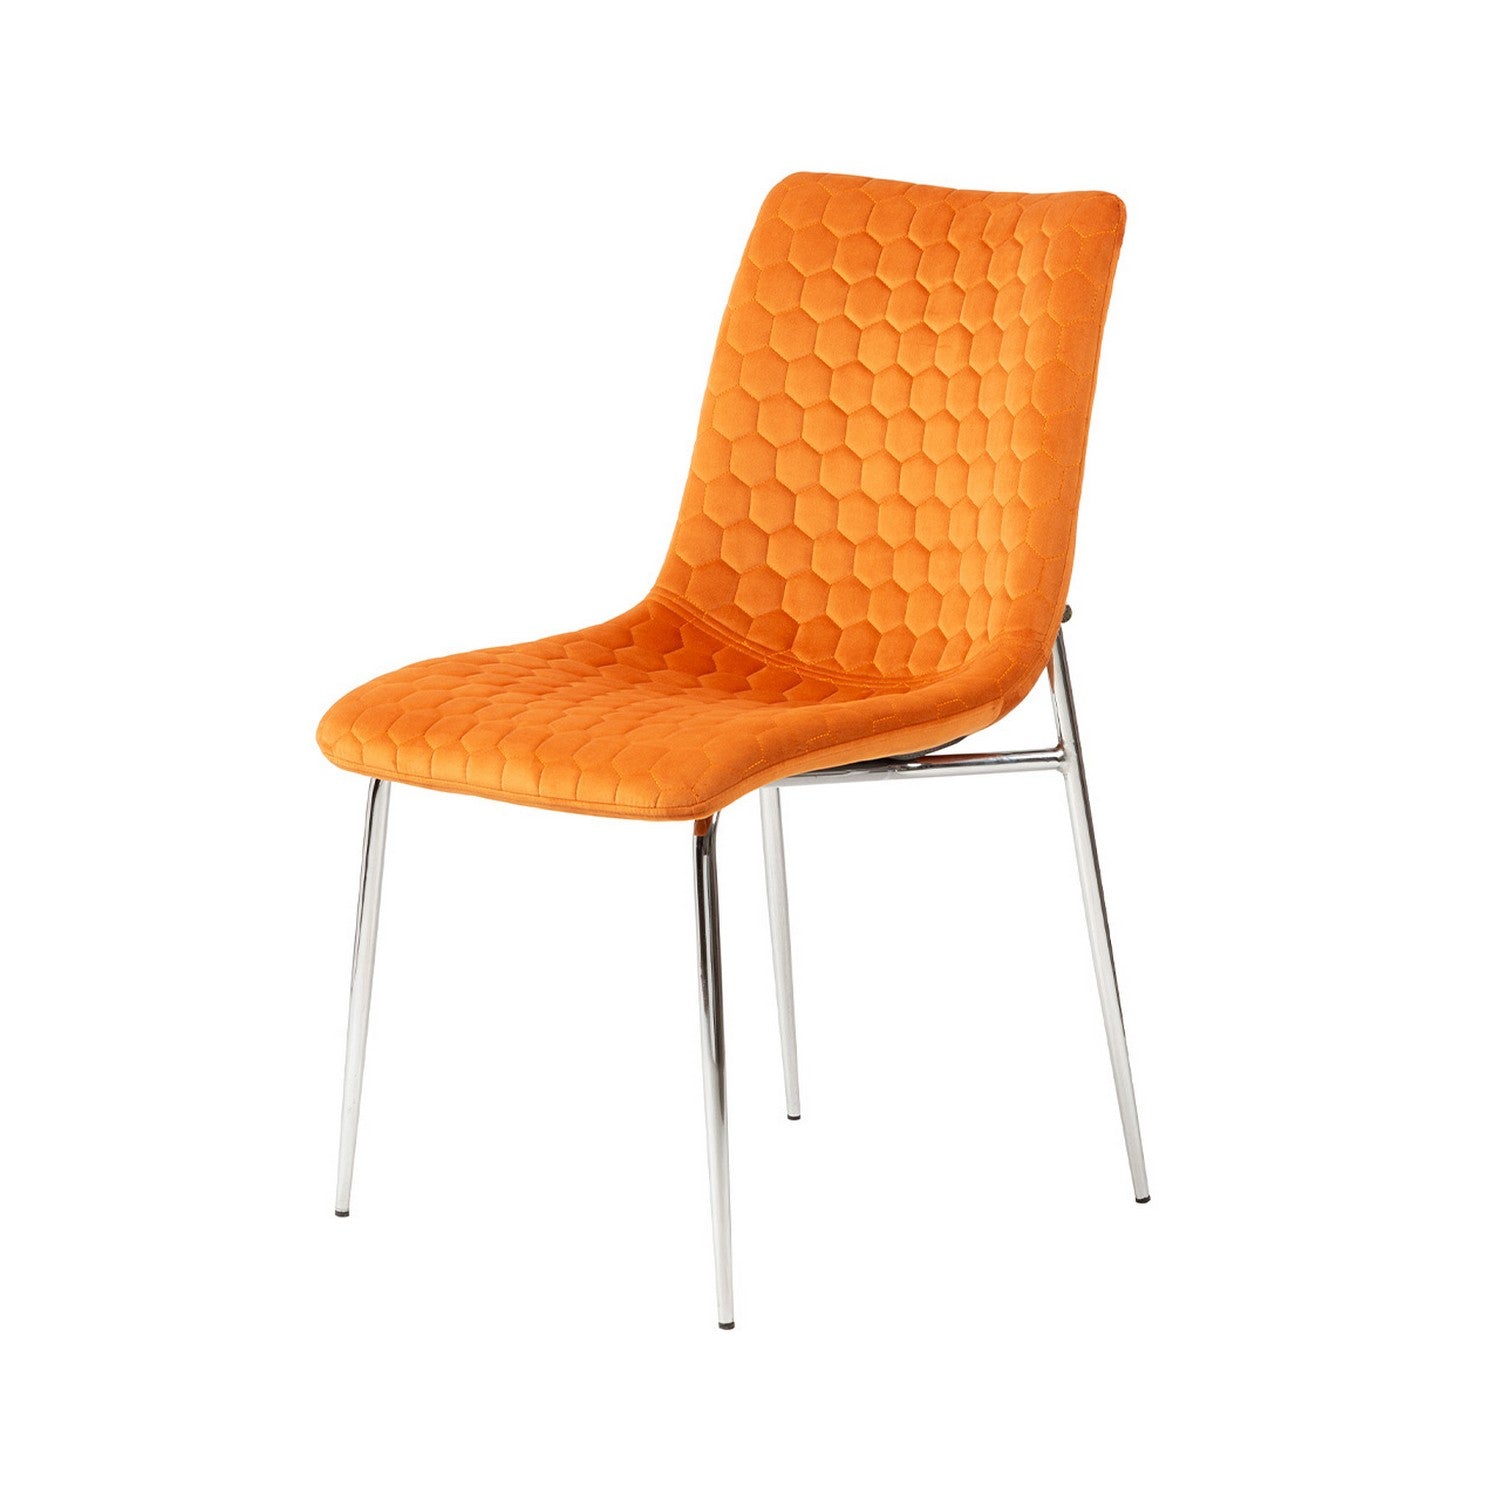 Orange Dining Chair With Chrome Legs